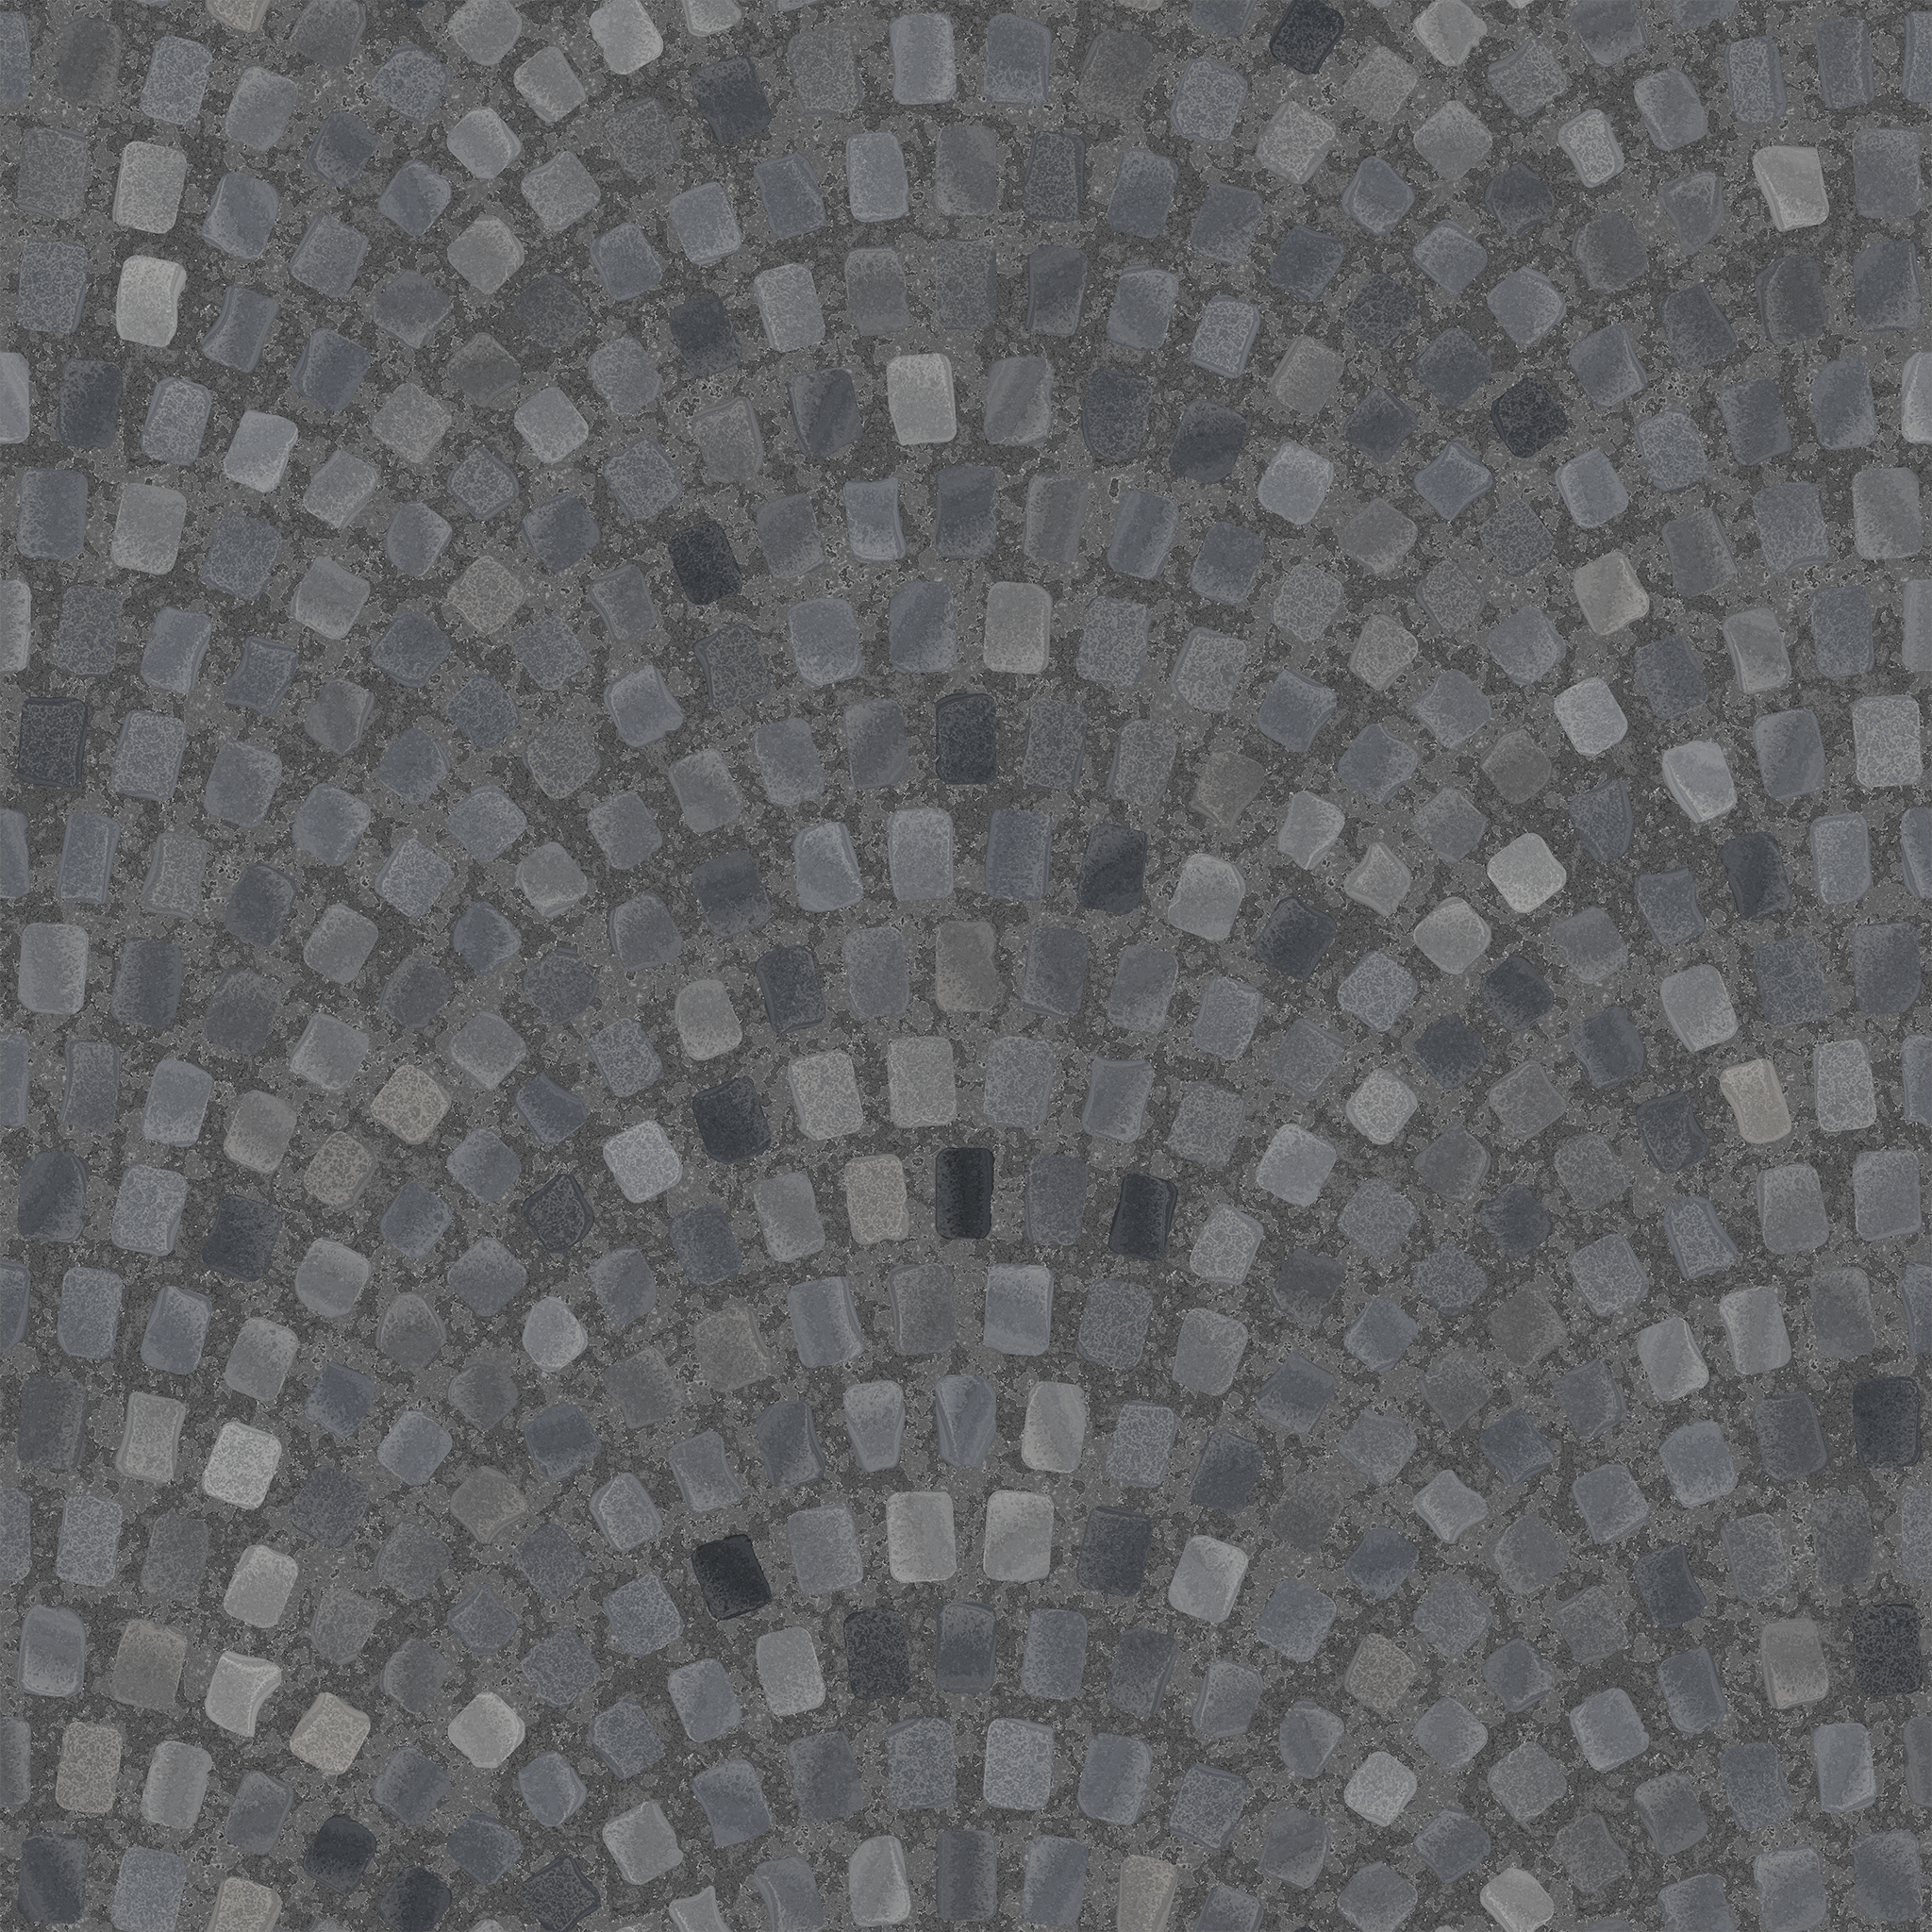 Free Images  rock texture interior building cobblestone wild  construction pattern stone wall brick material grey rubble background  flooring damme 6000x3151   622955  Free stock photos  PxHere